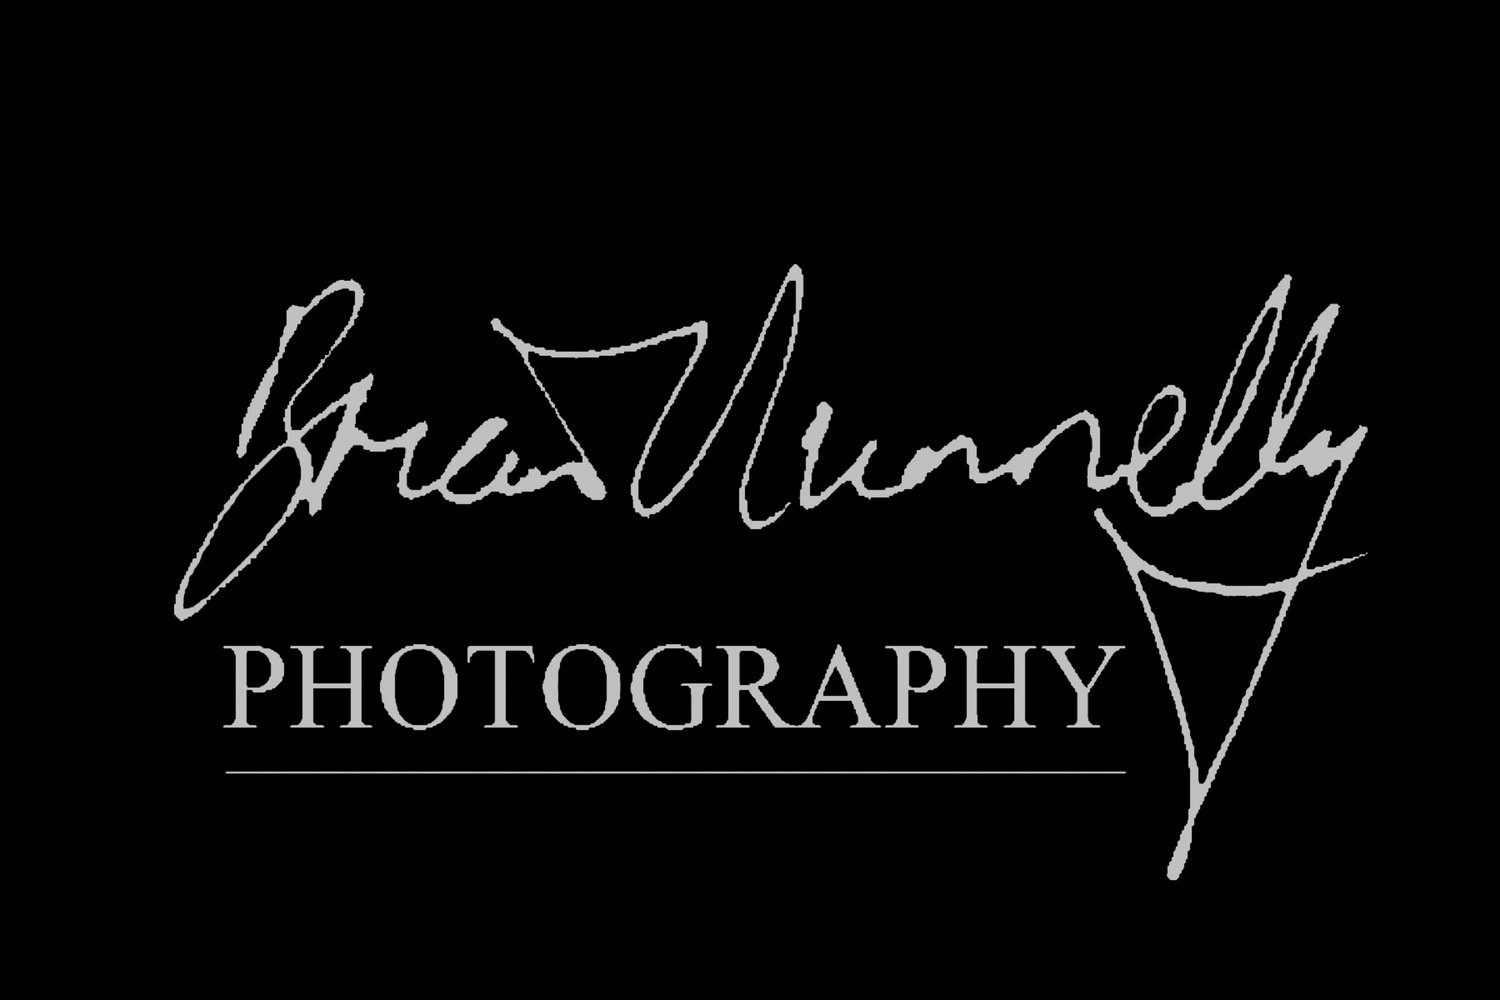 Brian Munnelly Photography